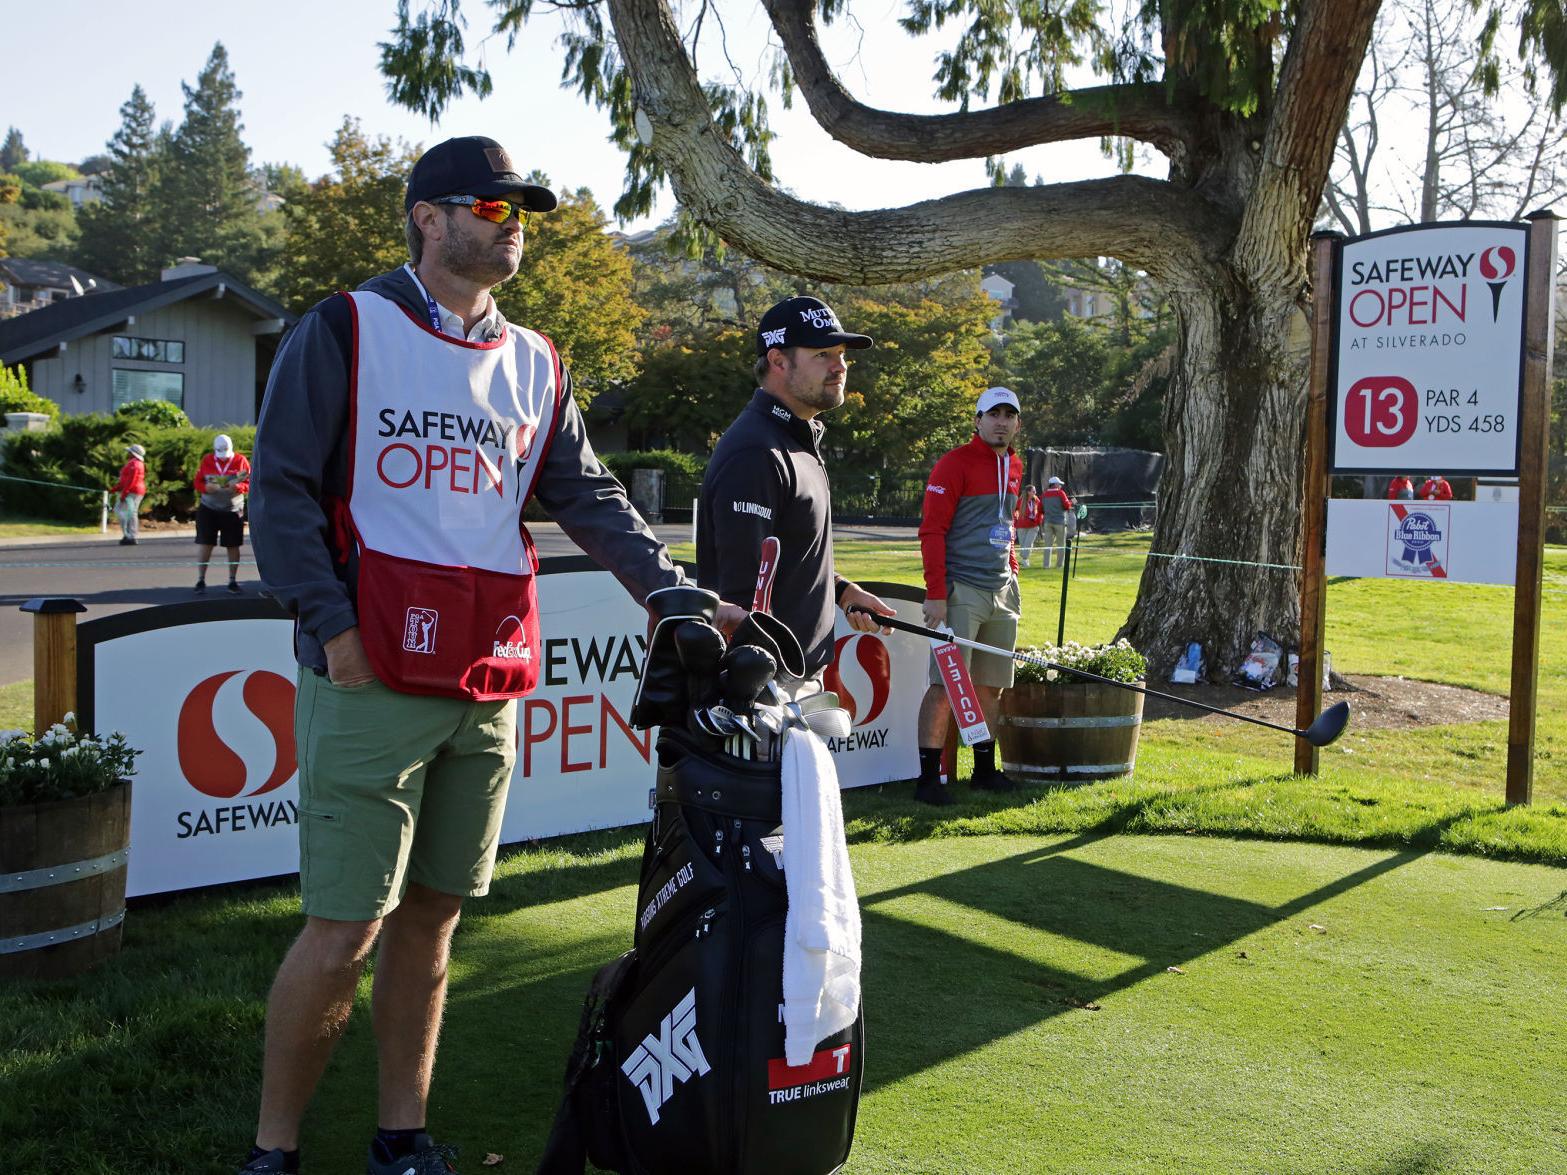 At Safeway Open Napa Native Is Caddie And Co Pilot Local News Napavalleyregister Com